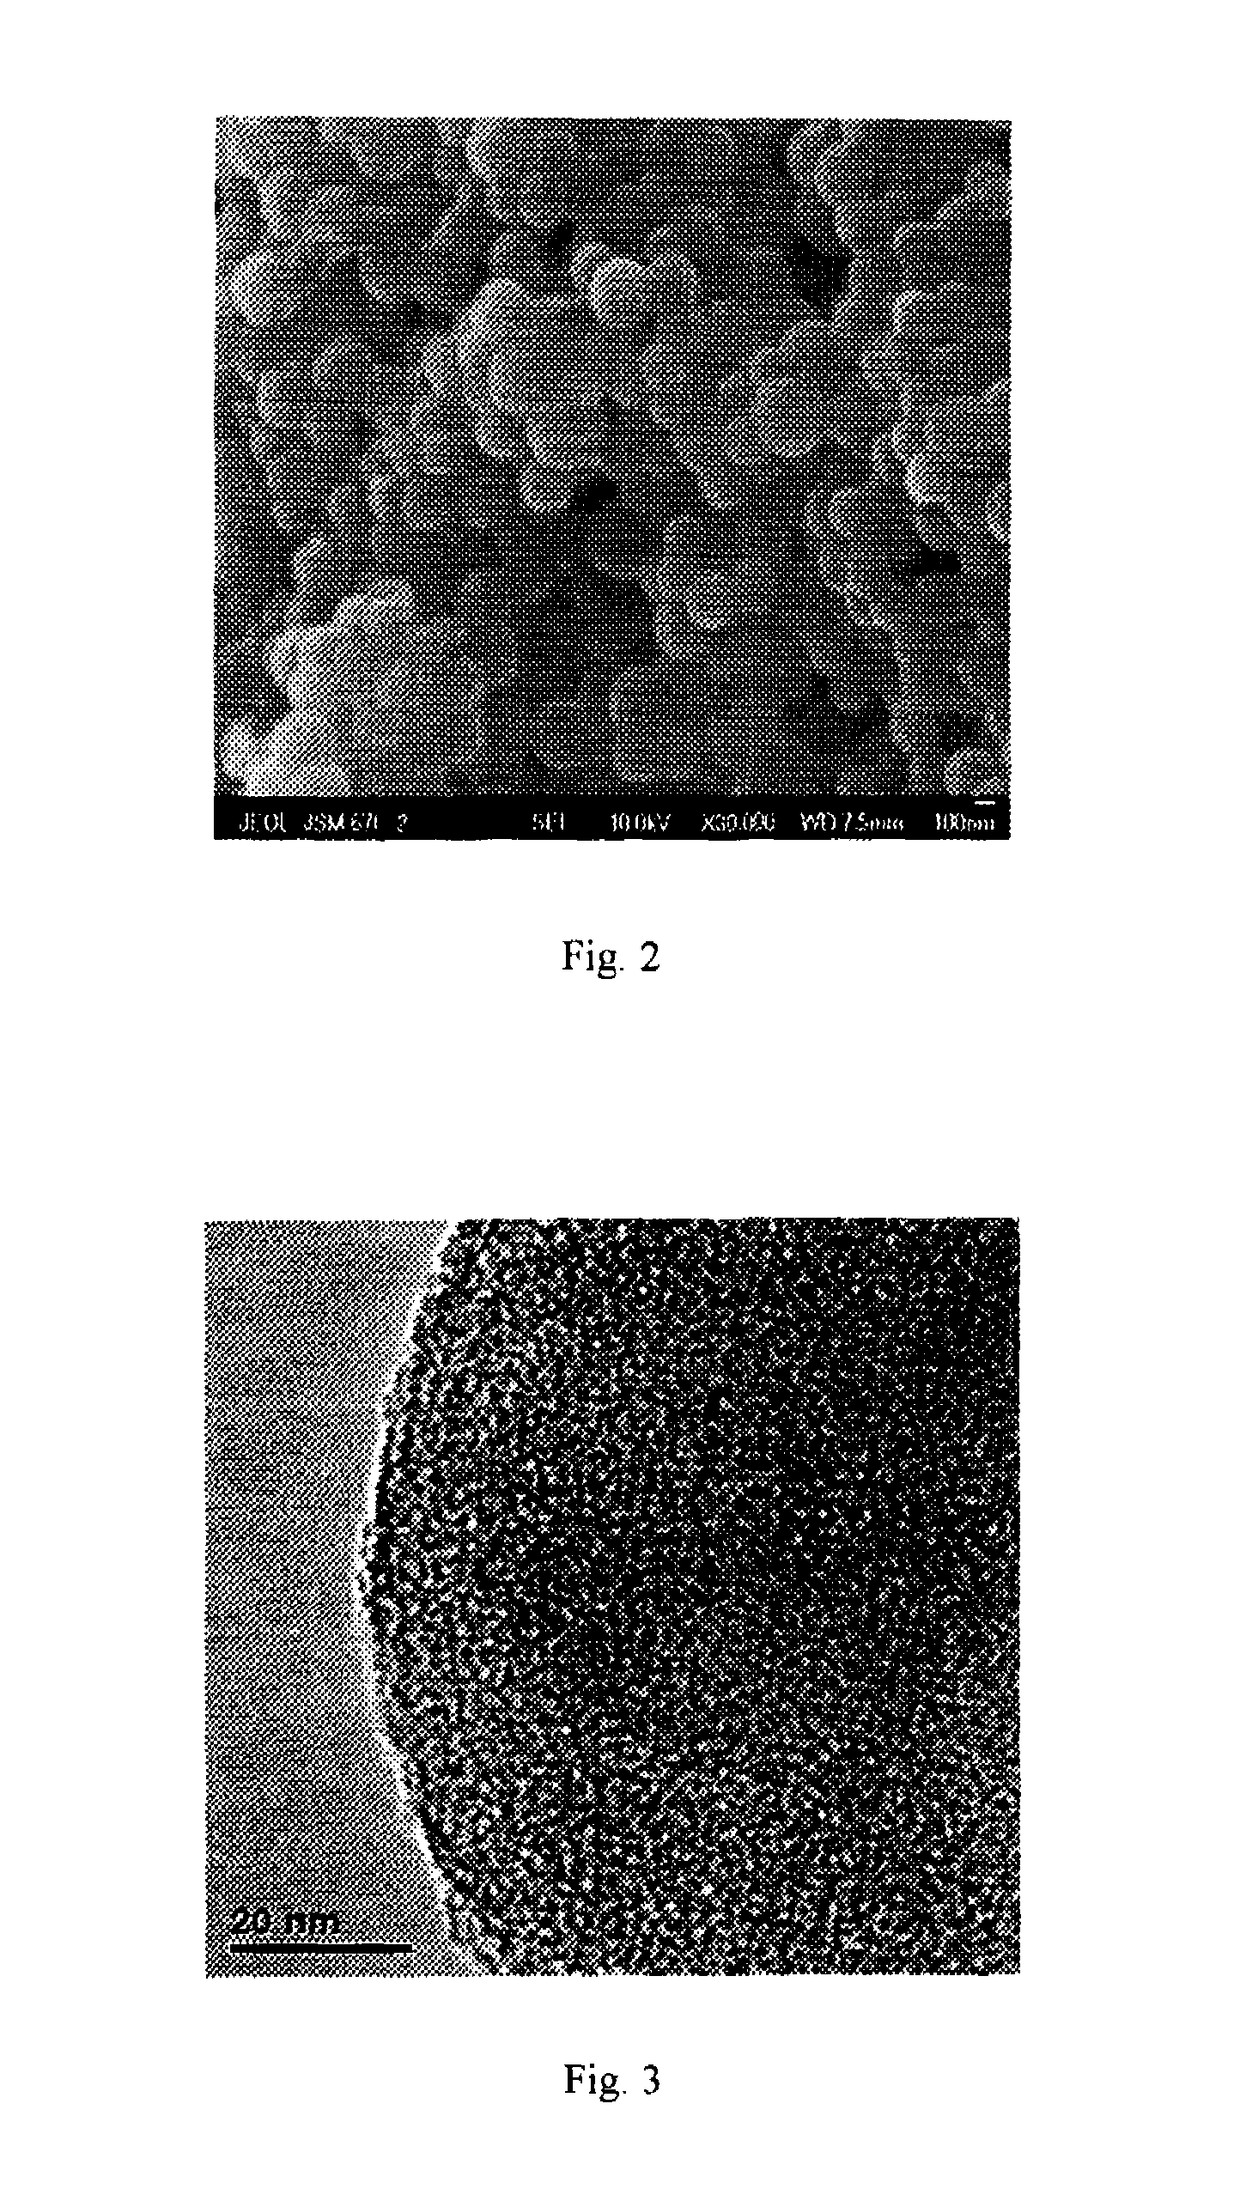 Sulfur-carbon composite material, its application in lithium-sulfur battery and method for preparing said composite material